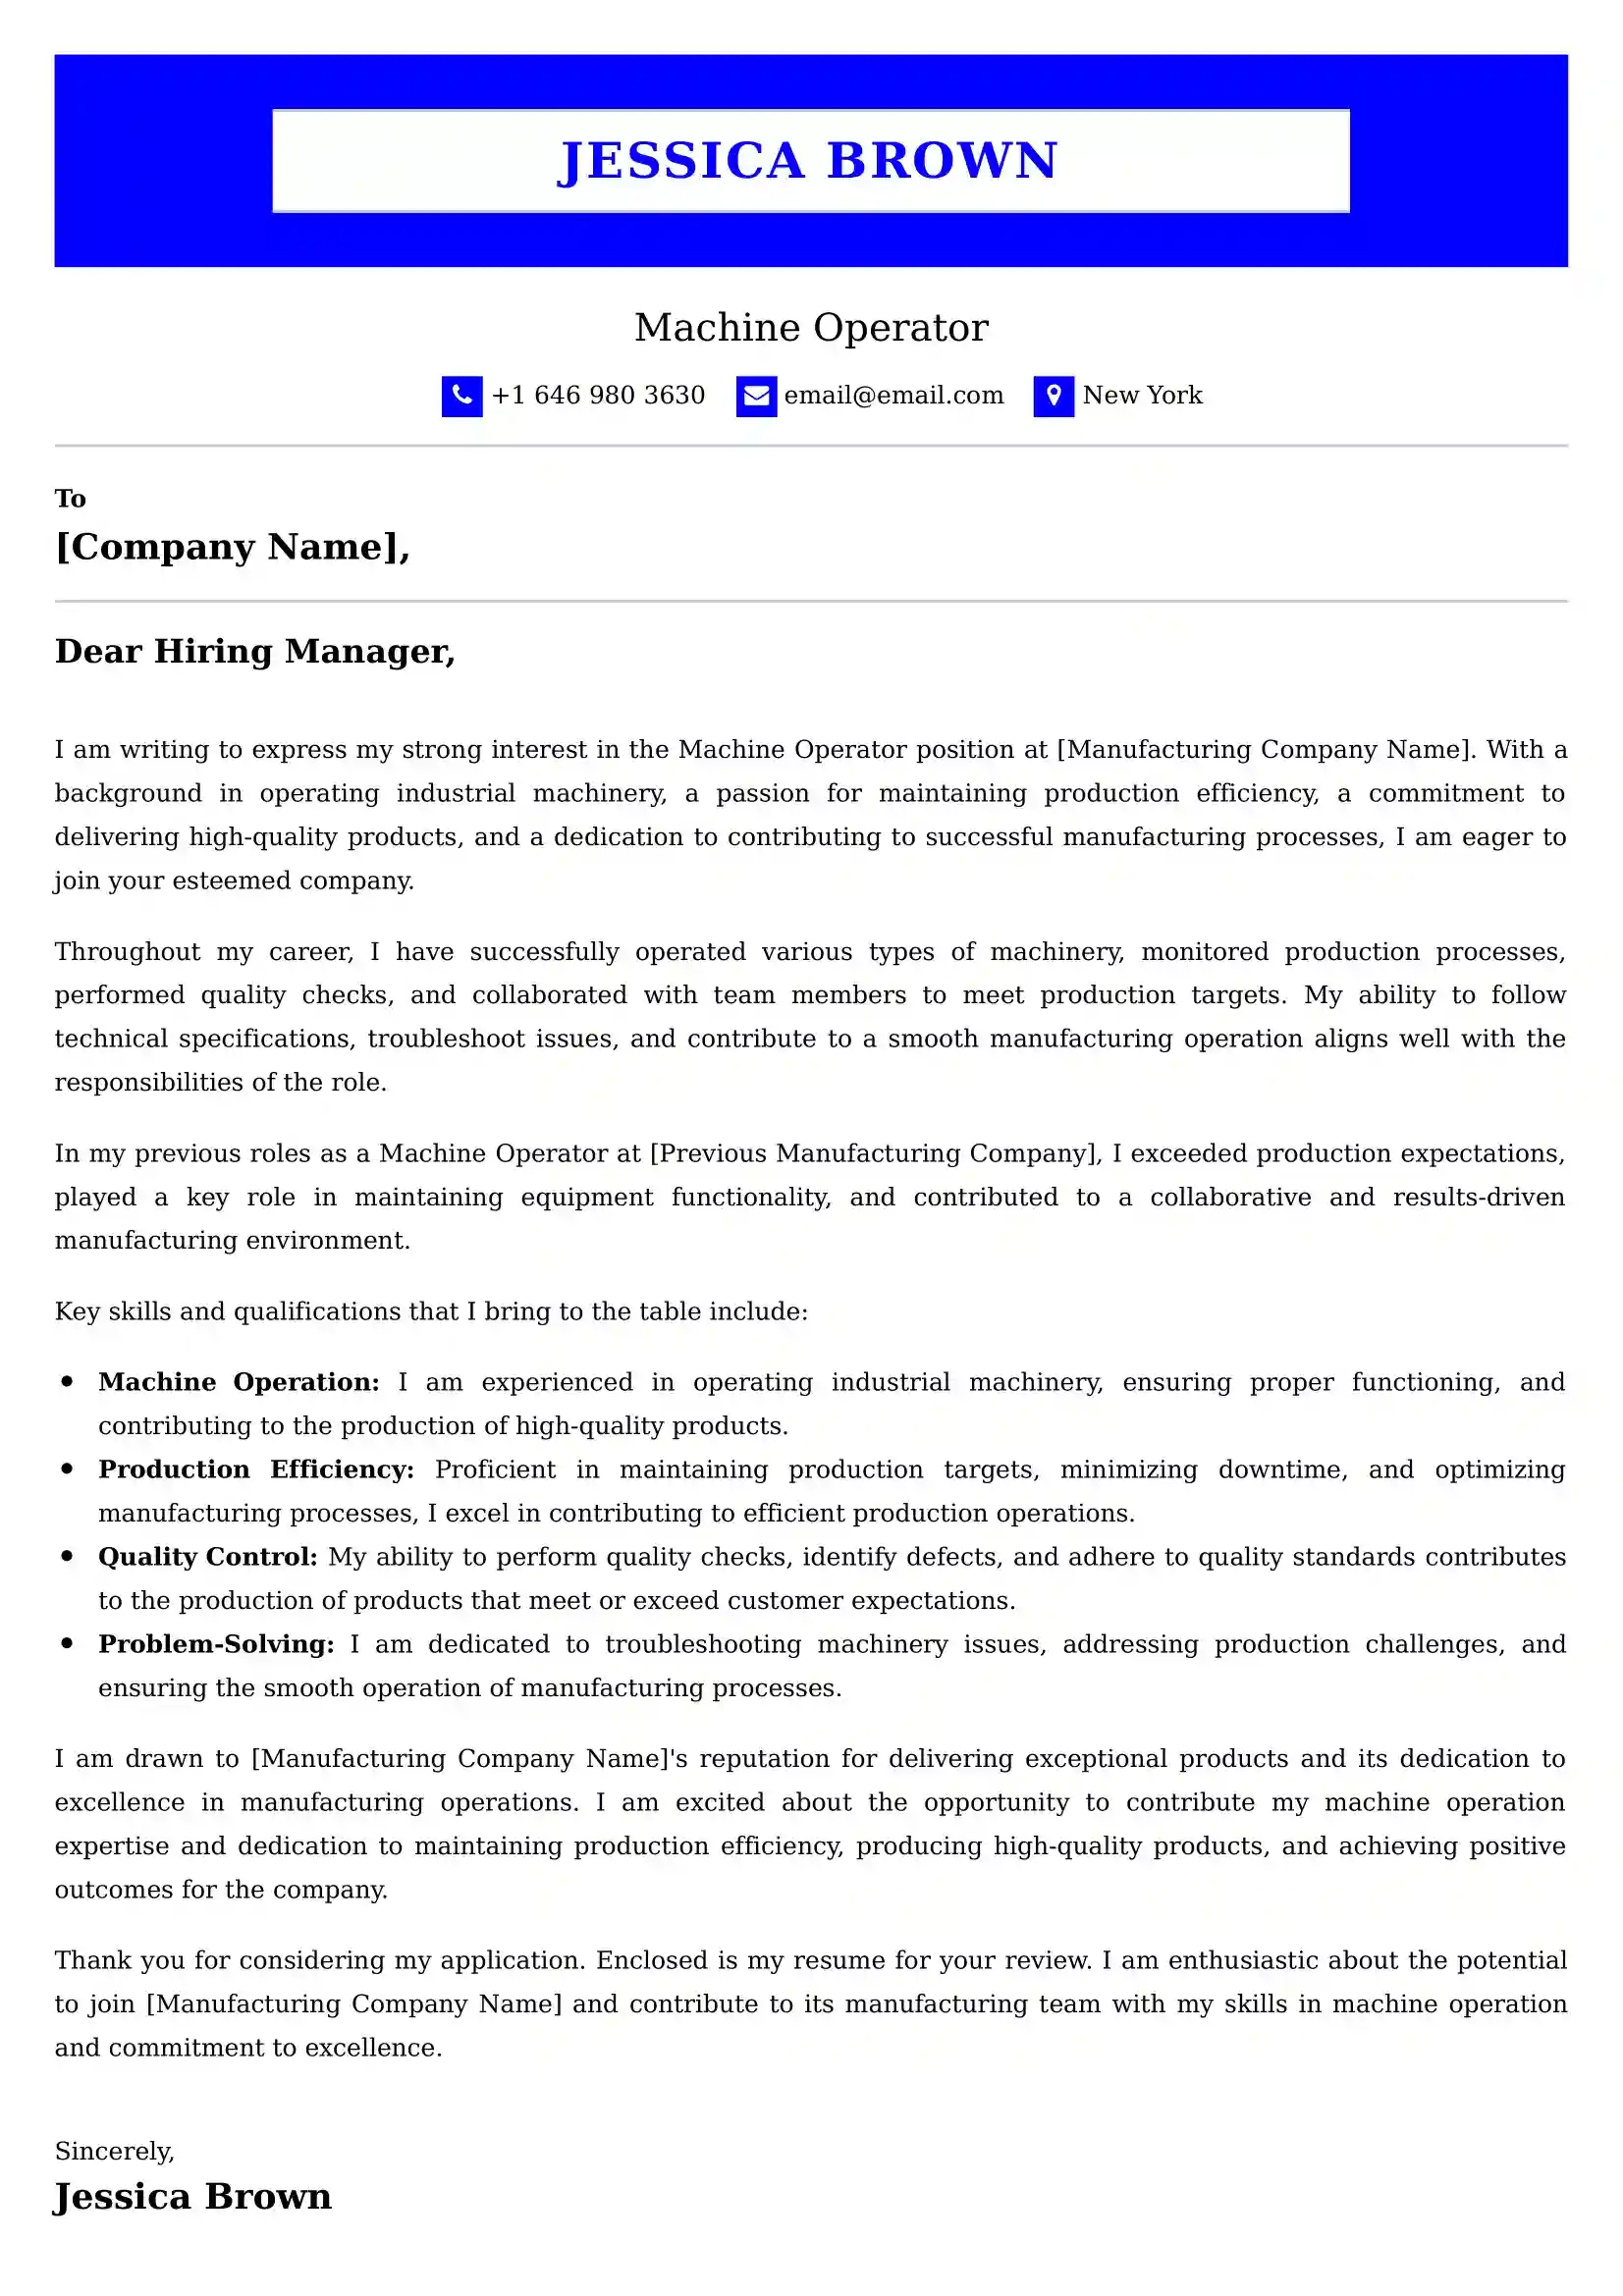 Machine Operator Cover Letter Examples UK - Tips and Guide